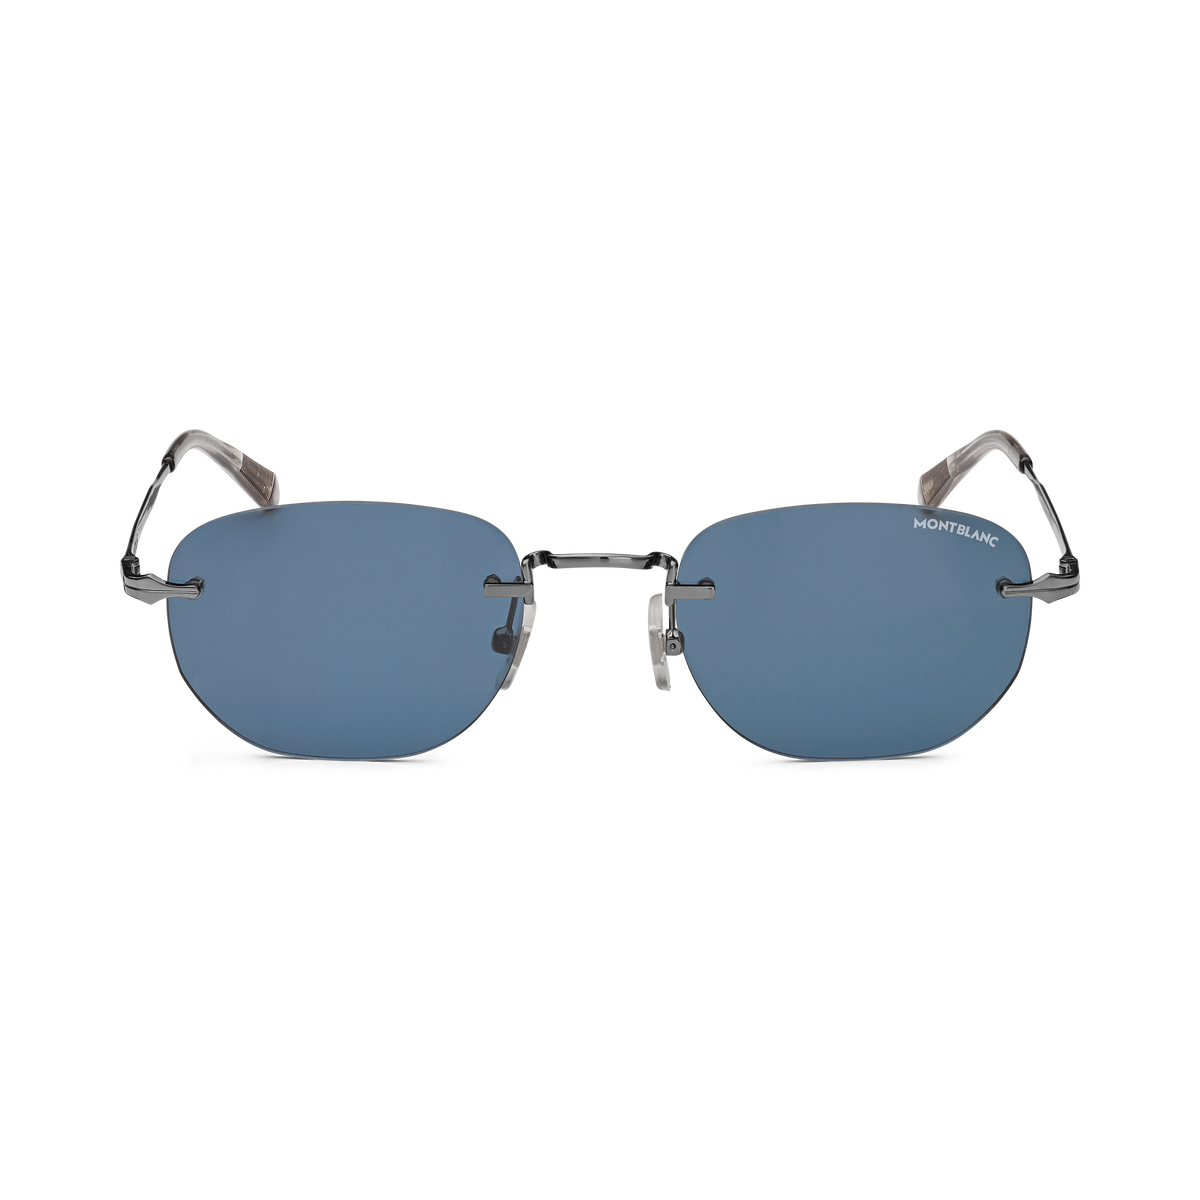 Rectangular Sunglasses with Silver-Colored Metal Frame